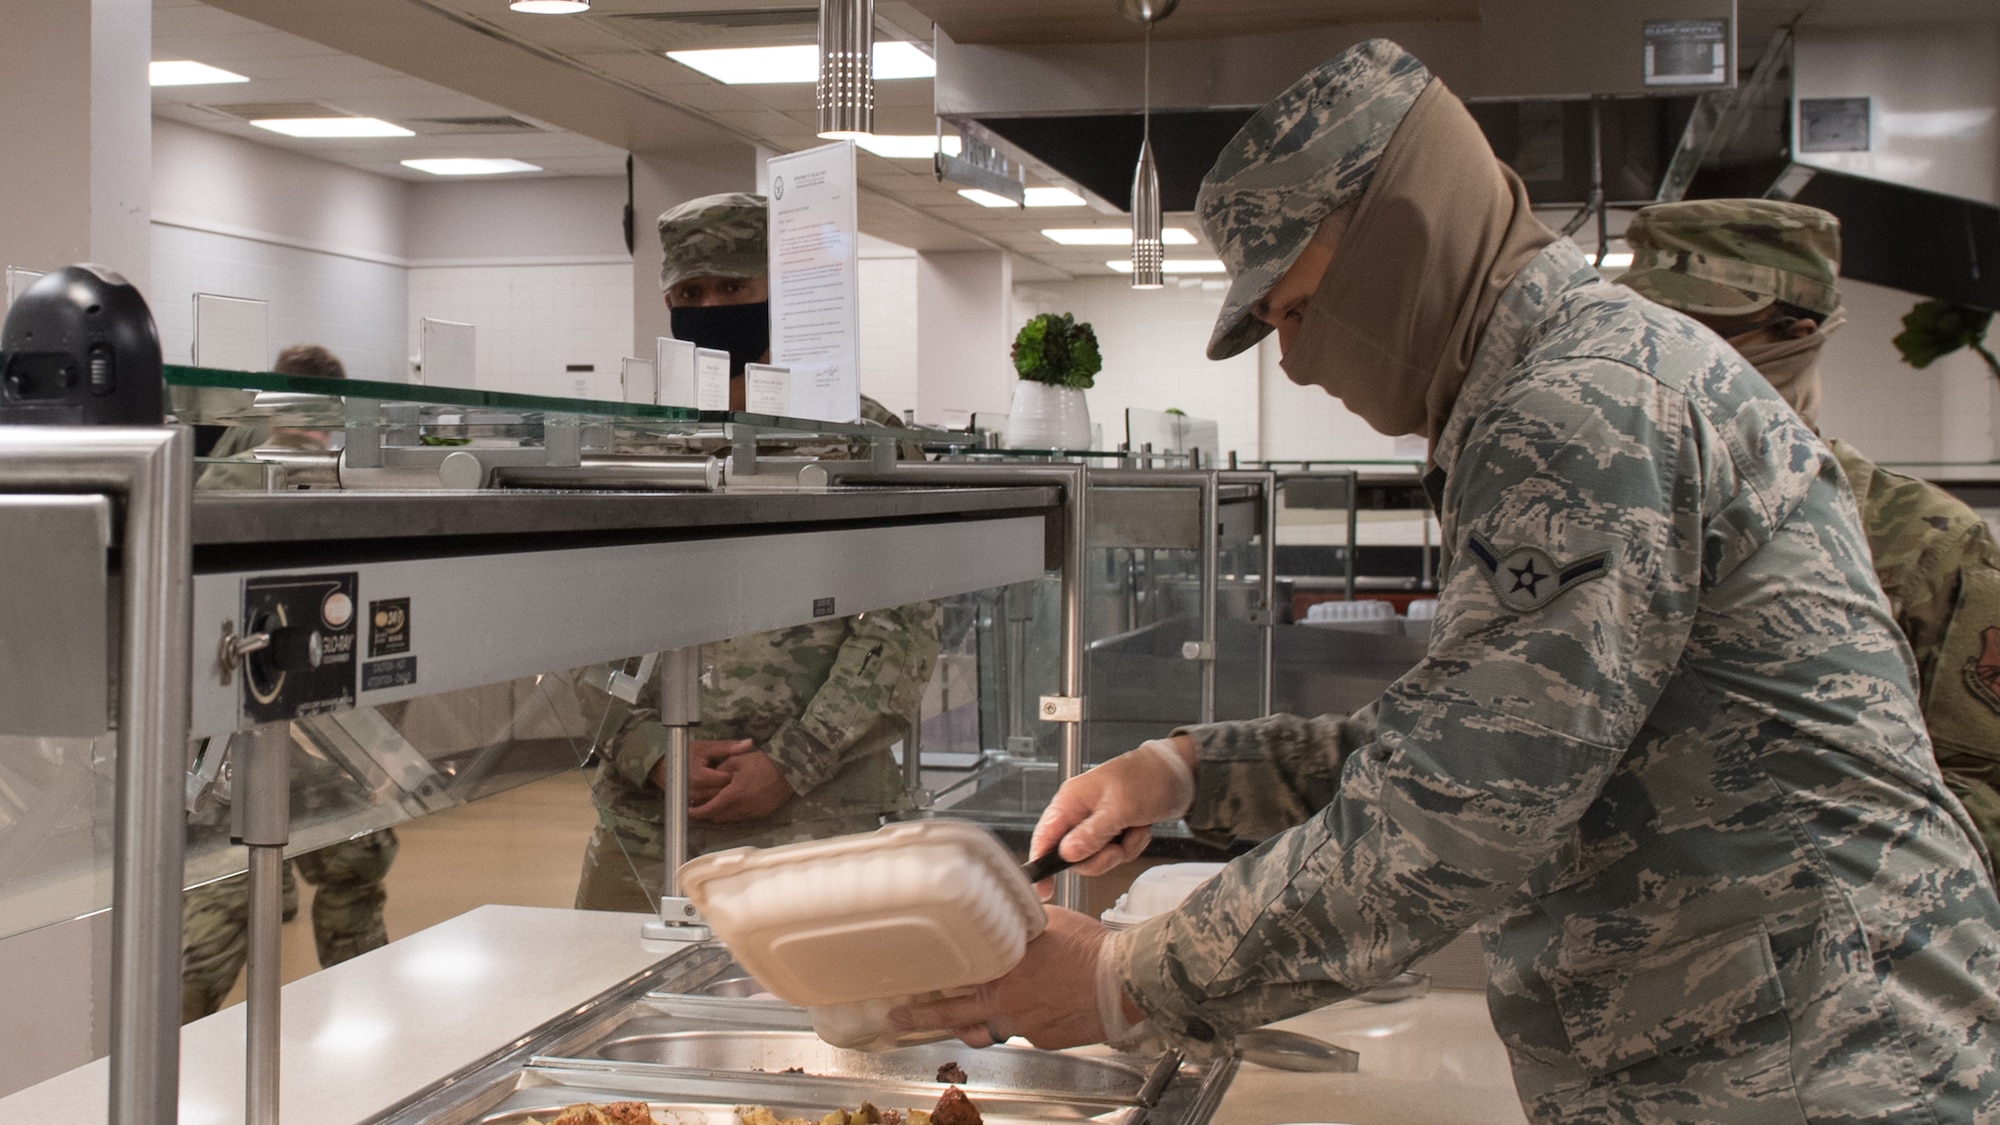 Airman Robert Rivera Sarriera, 2nd Force Support Squadron dining facility shift worker, prepares a meal for a customer at Barksdale Air Force Base, La., April 15, 2020. All food items are currently being made to go. (U.S. Air Force photo by Tech. Sgt. Daniel Martinez)